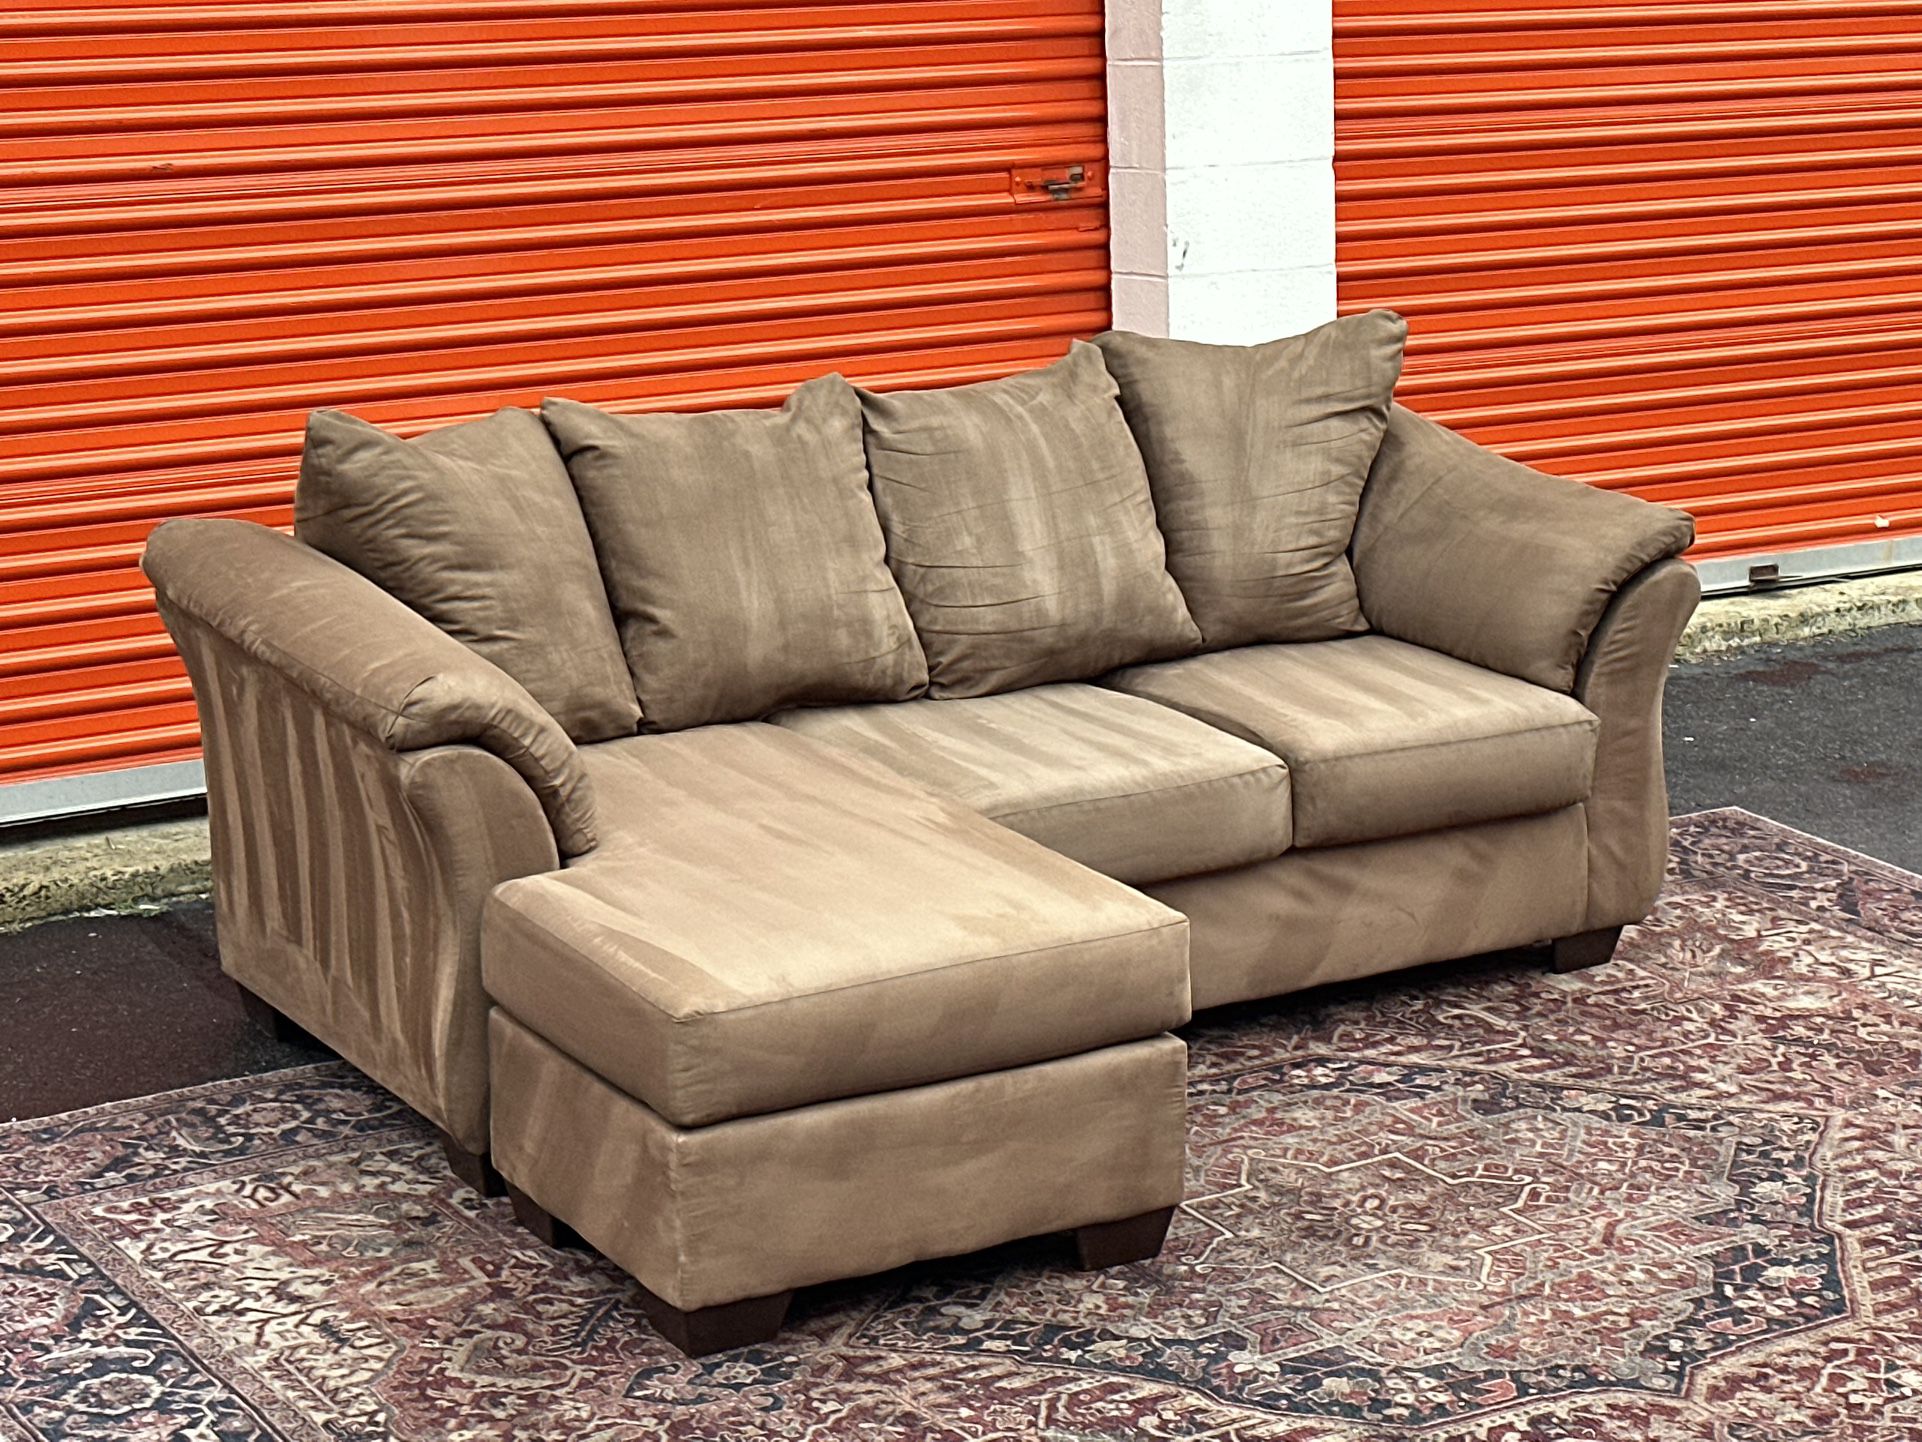 Ashley’s L Shape Reversible Sectional Couch Set Free Curbside Delivery 